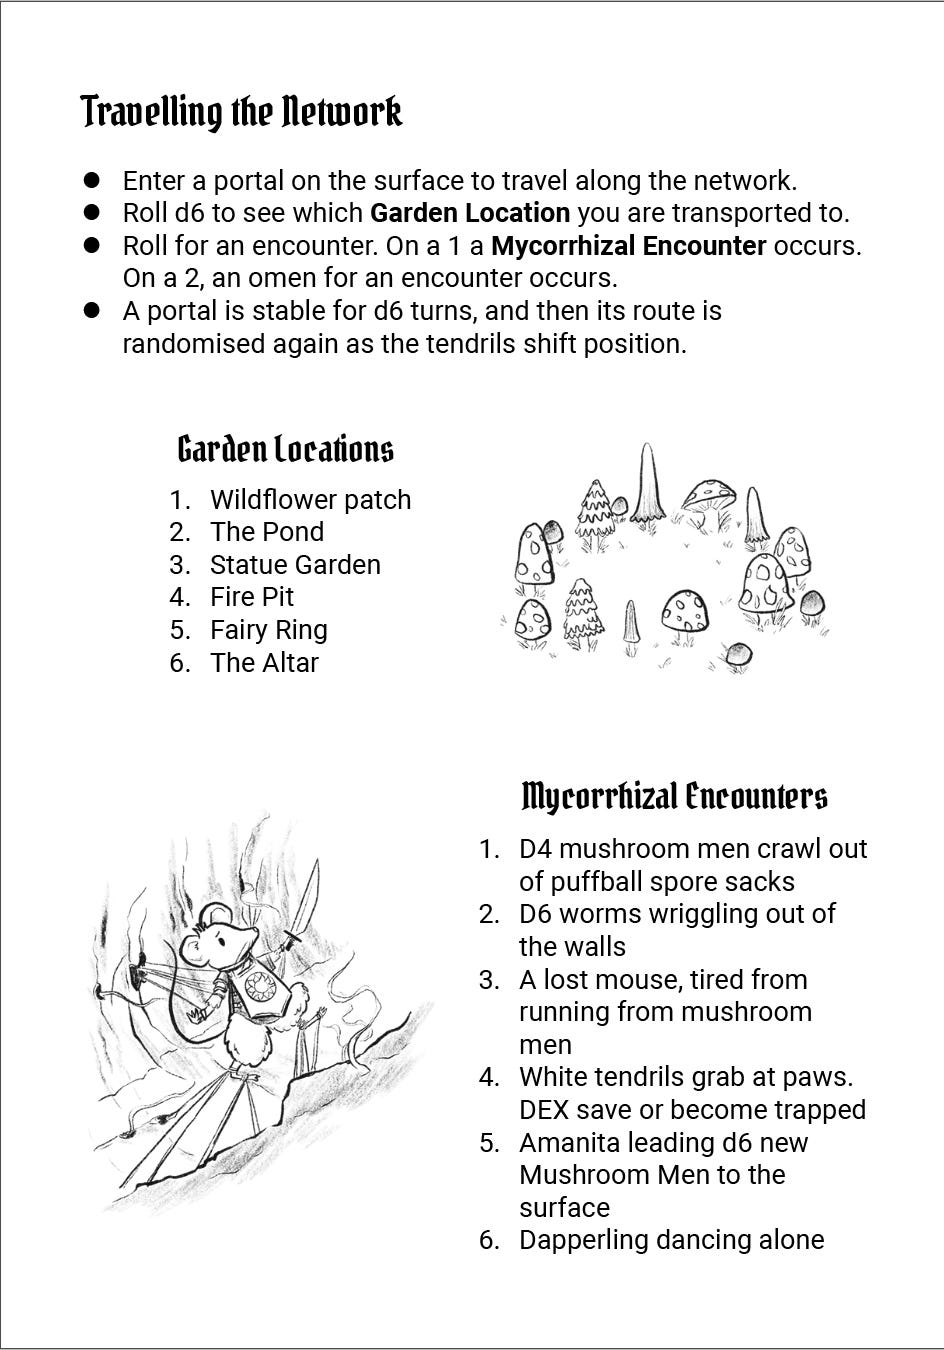 A layout page from mycelium. It shows information on travelling along a mushroom root network, a table of garden locations, and a table of mycorrhizal encounters. It also has an illustration of a mushroom fairy ring, and another of a mouse dressed in armour, with a sword, being grabbed by white fungal tentacles.